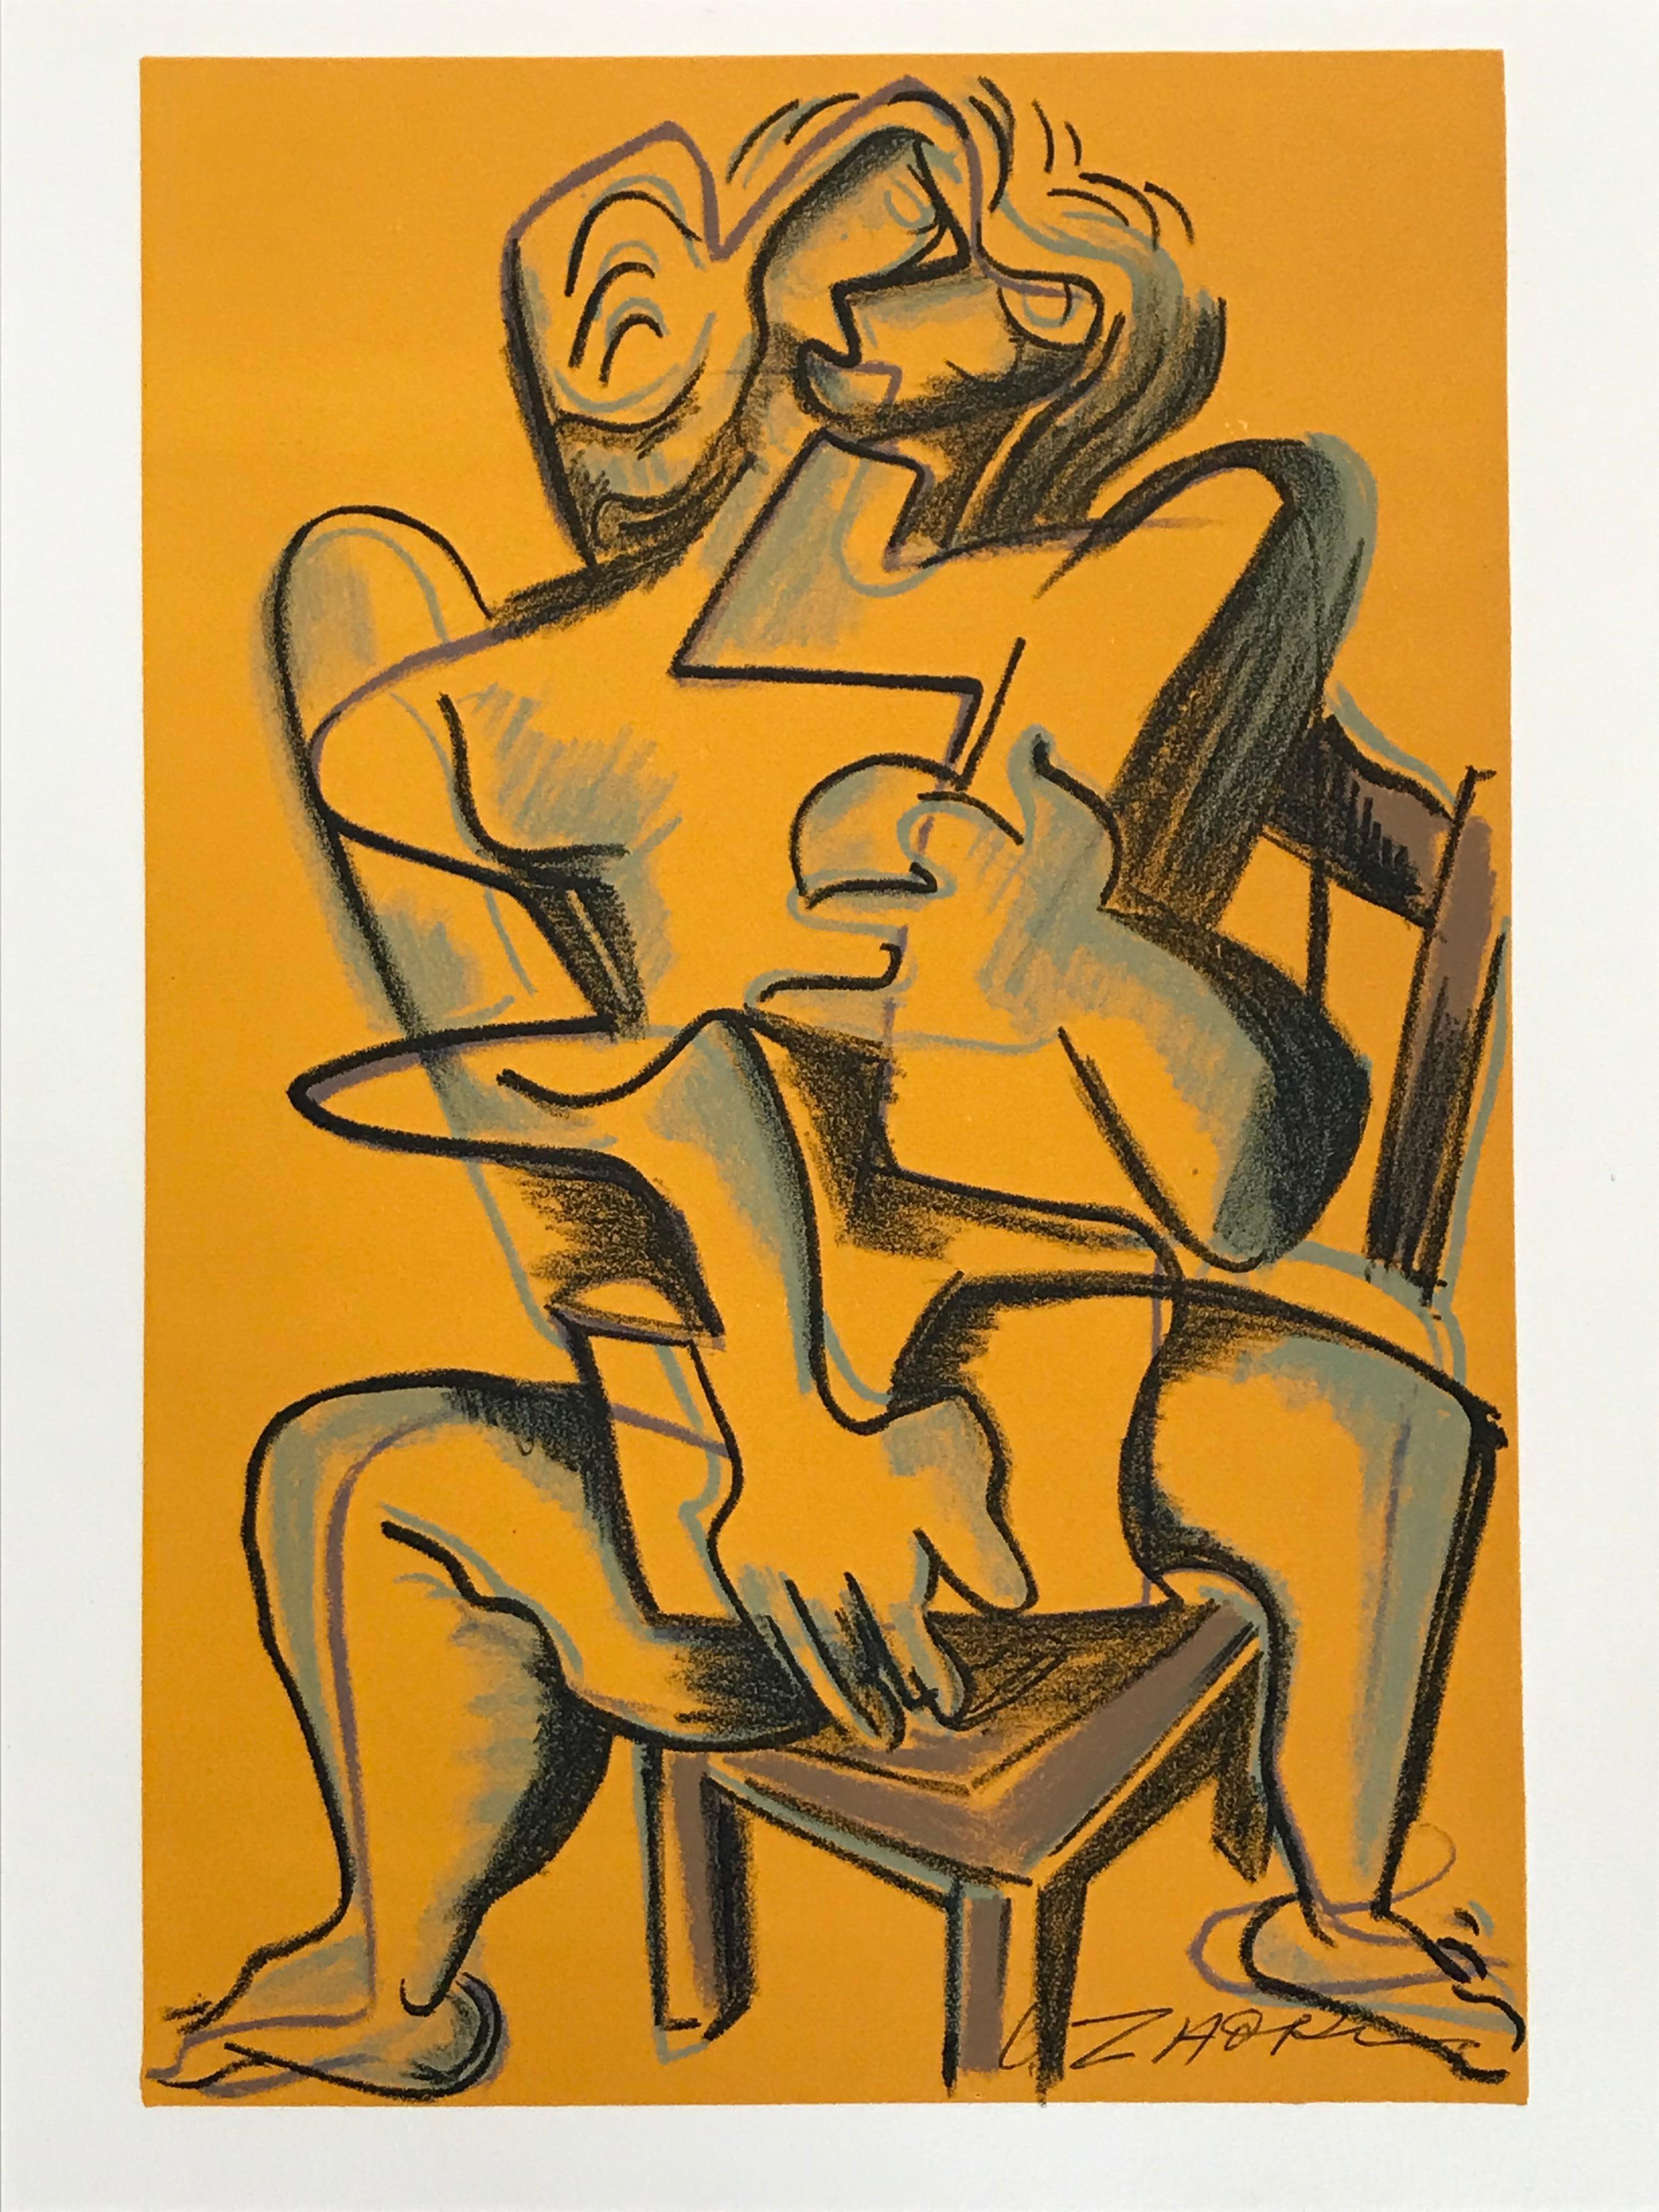 Zadkine's lithography that embodies the book of the Labours of Hercules.
Edited by Czwiklitzer, Paris 1960 on vellum paper. 
The piece is handwritten signed. 
It exists 134 copies
Subject : 16 x 23,5 cms
Work of art : 38 x 28,5 
490 euros 